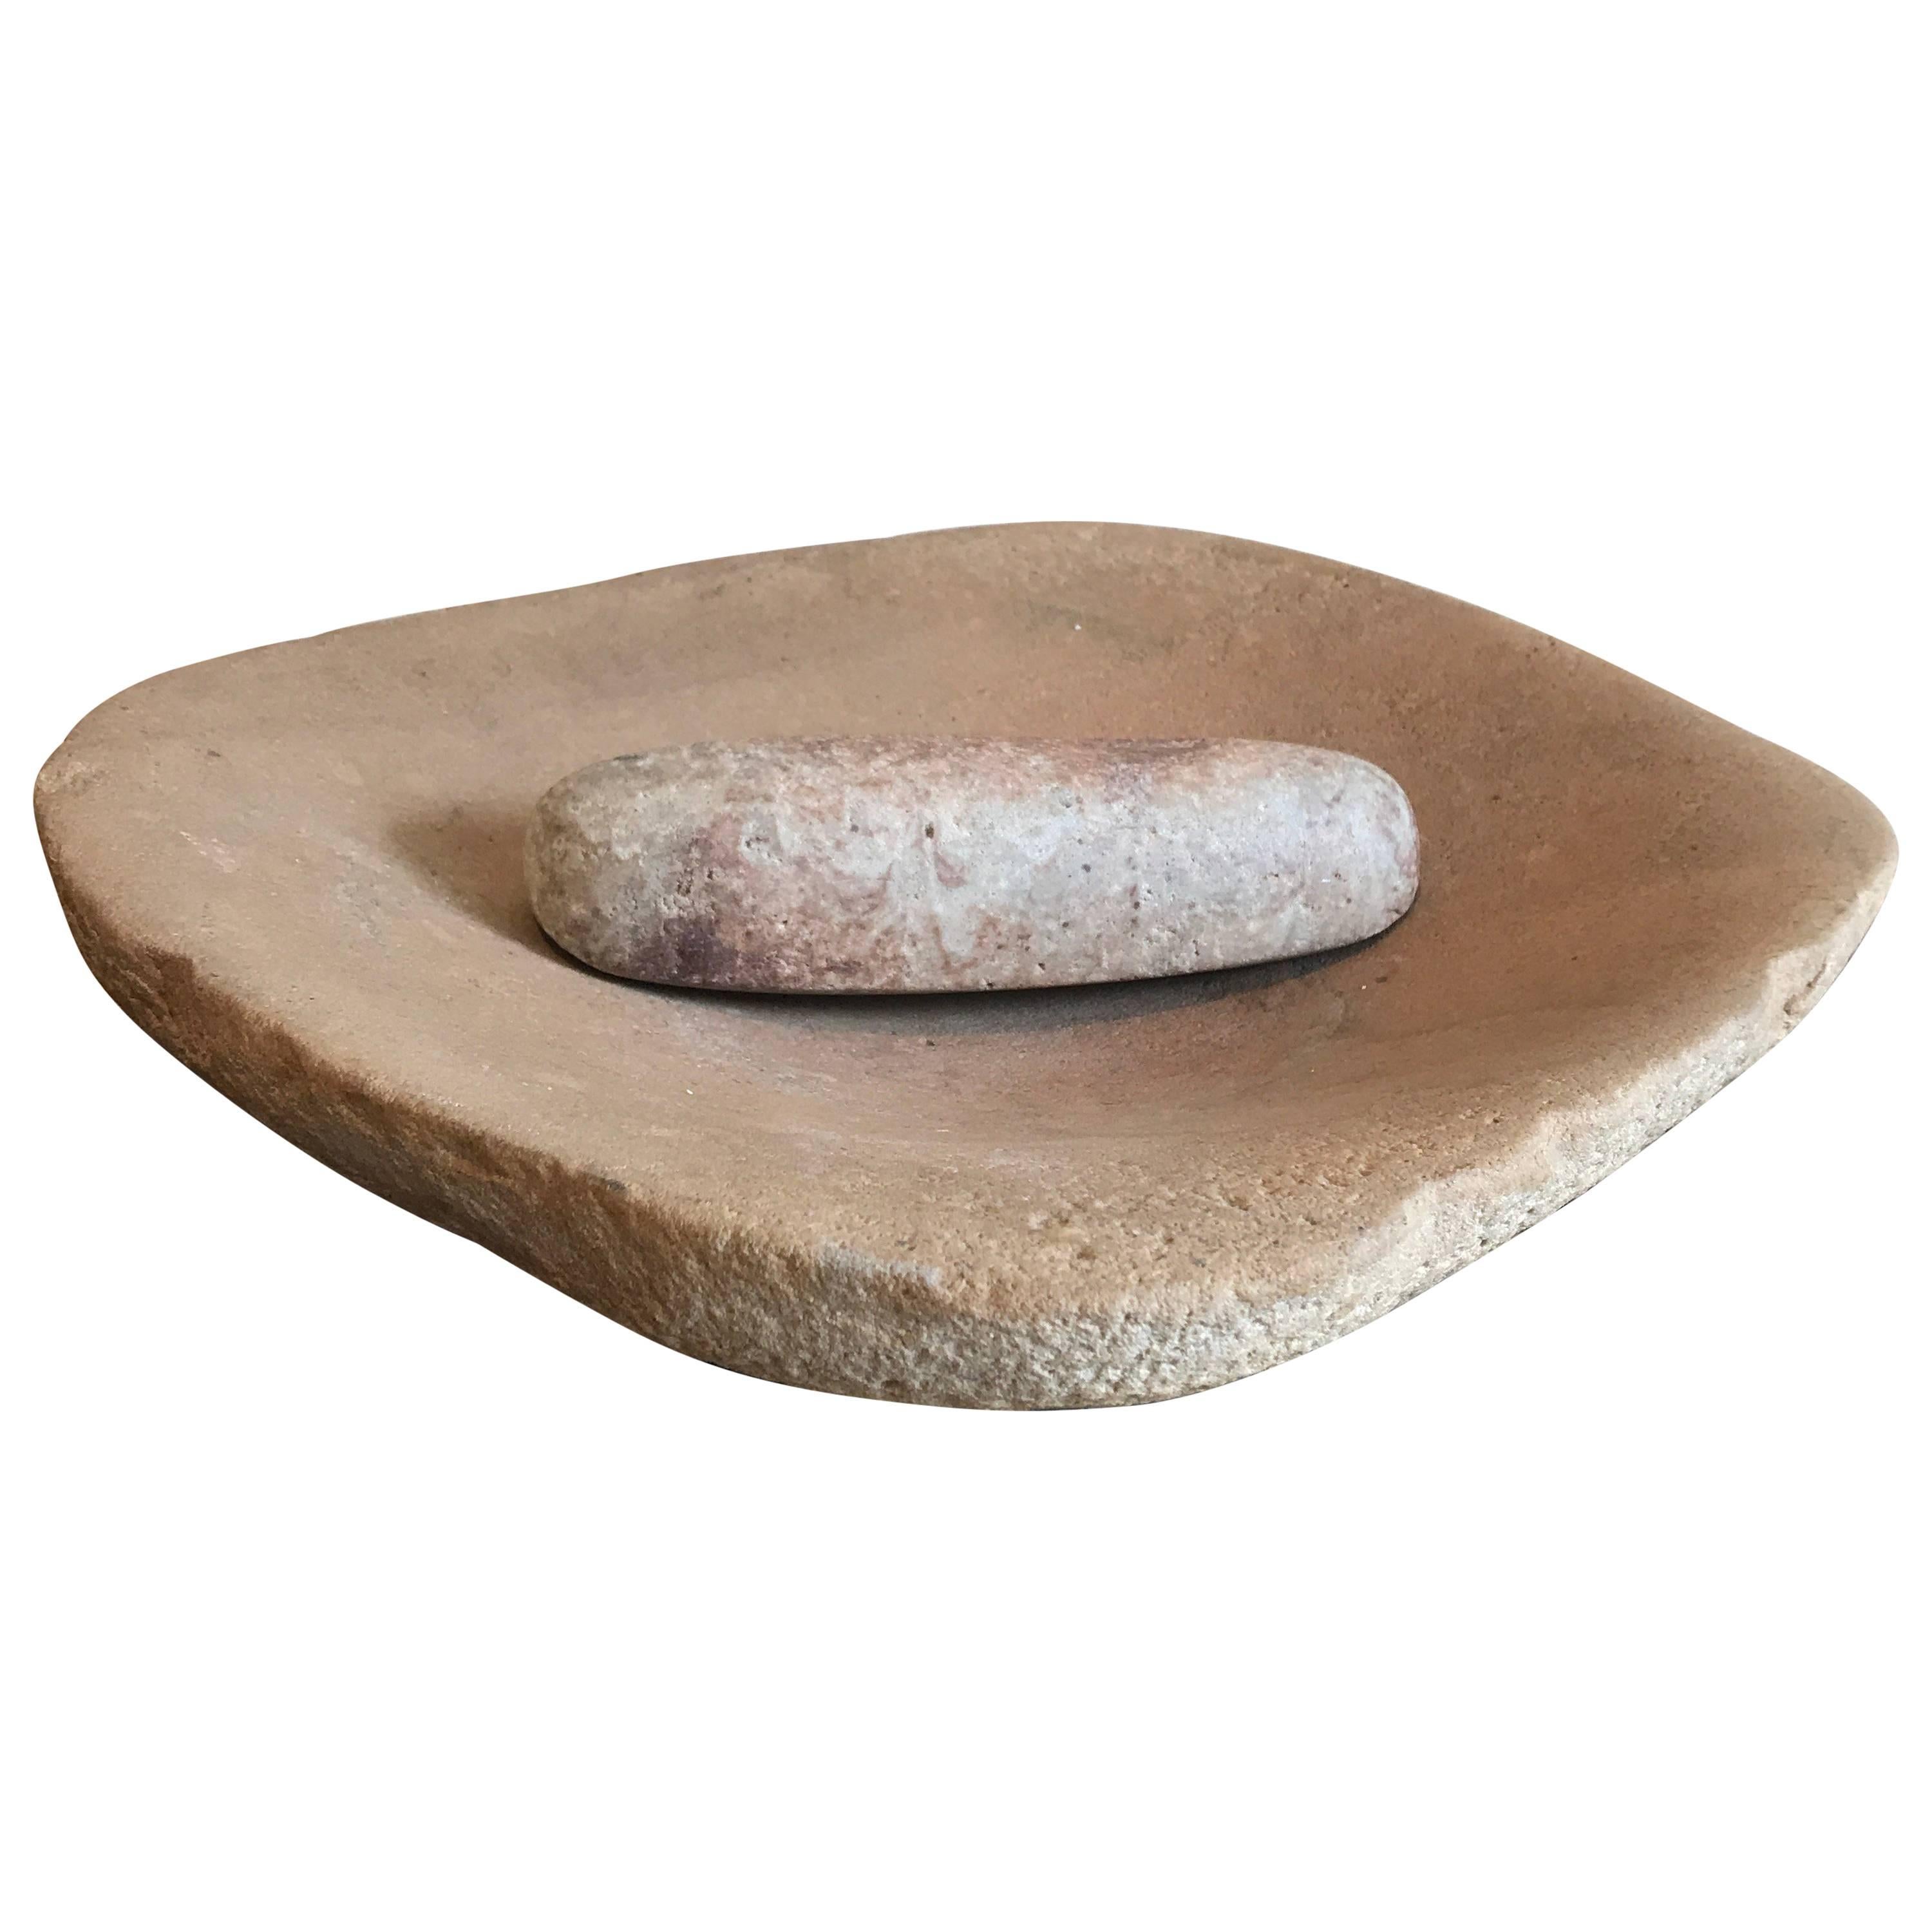 Native American Grinding Stone Bowl and Pestle